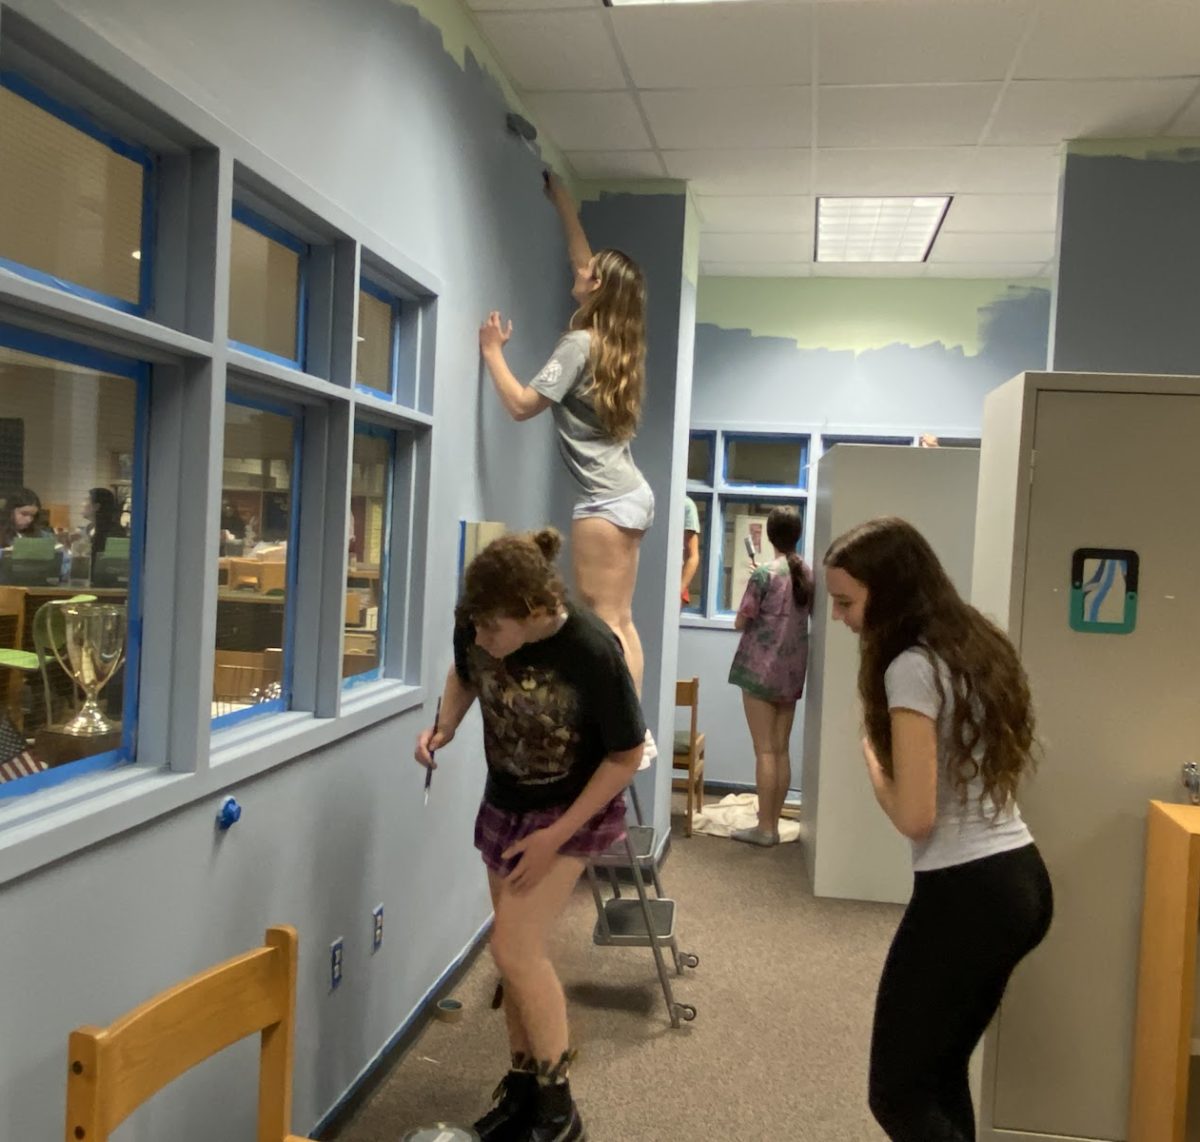 Interior design students work together to repaint the walls of the old storage room.